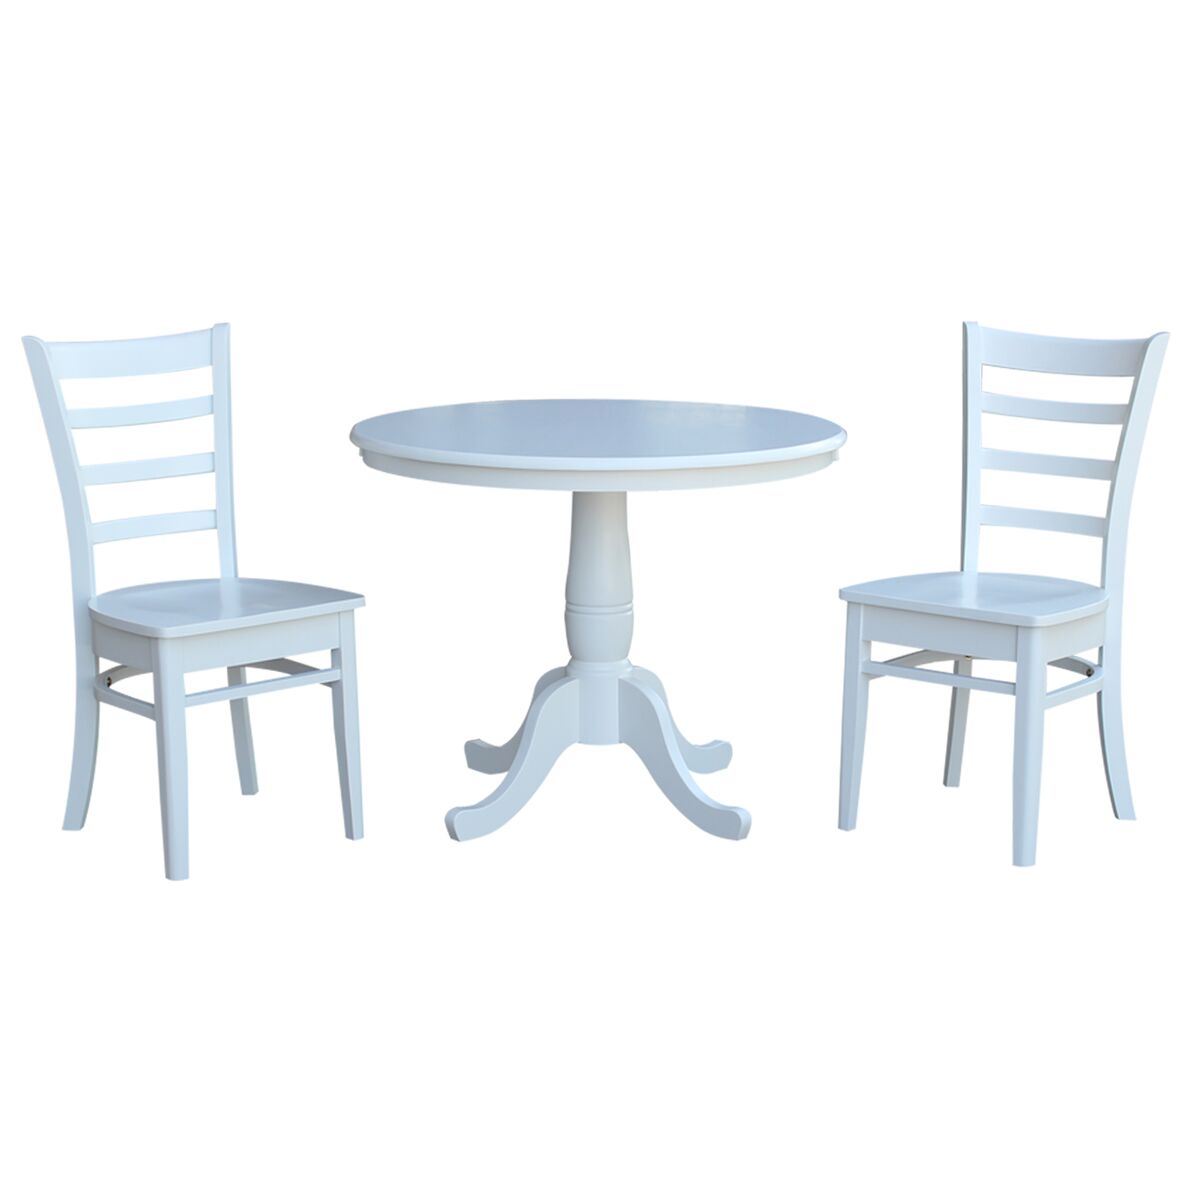 36 In. Round Top Pedestal Table With 2 Emily Side Chairs - 3 Piece Set